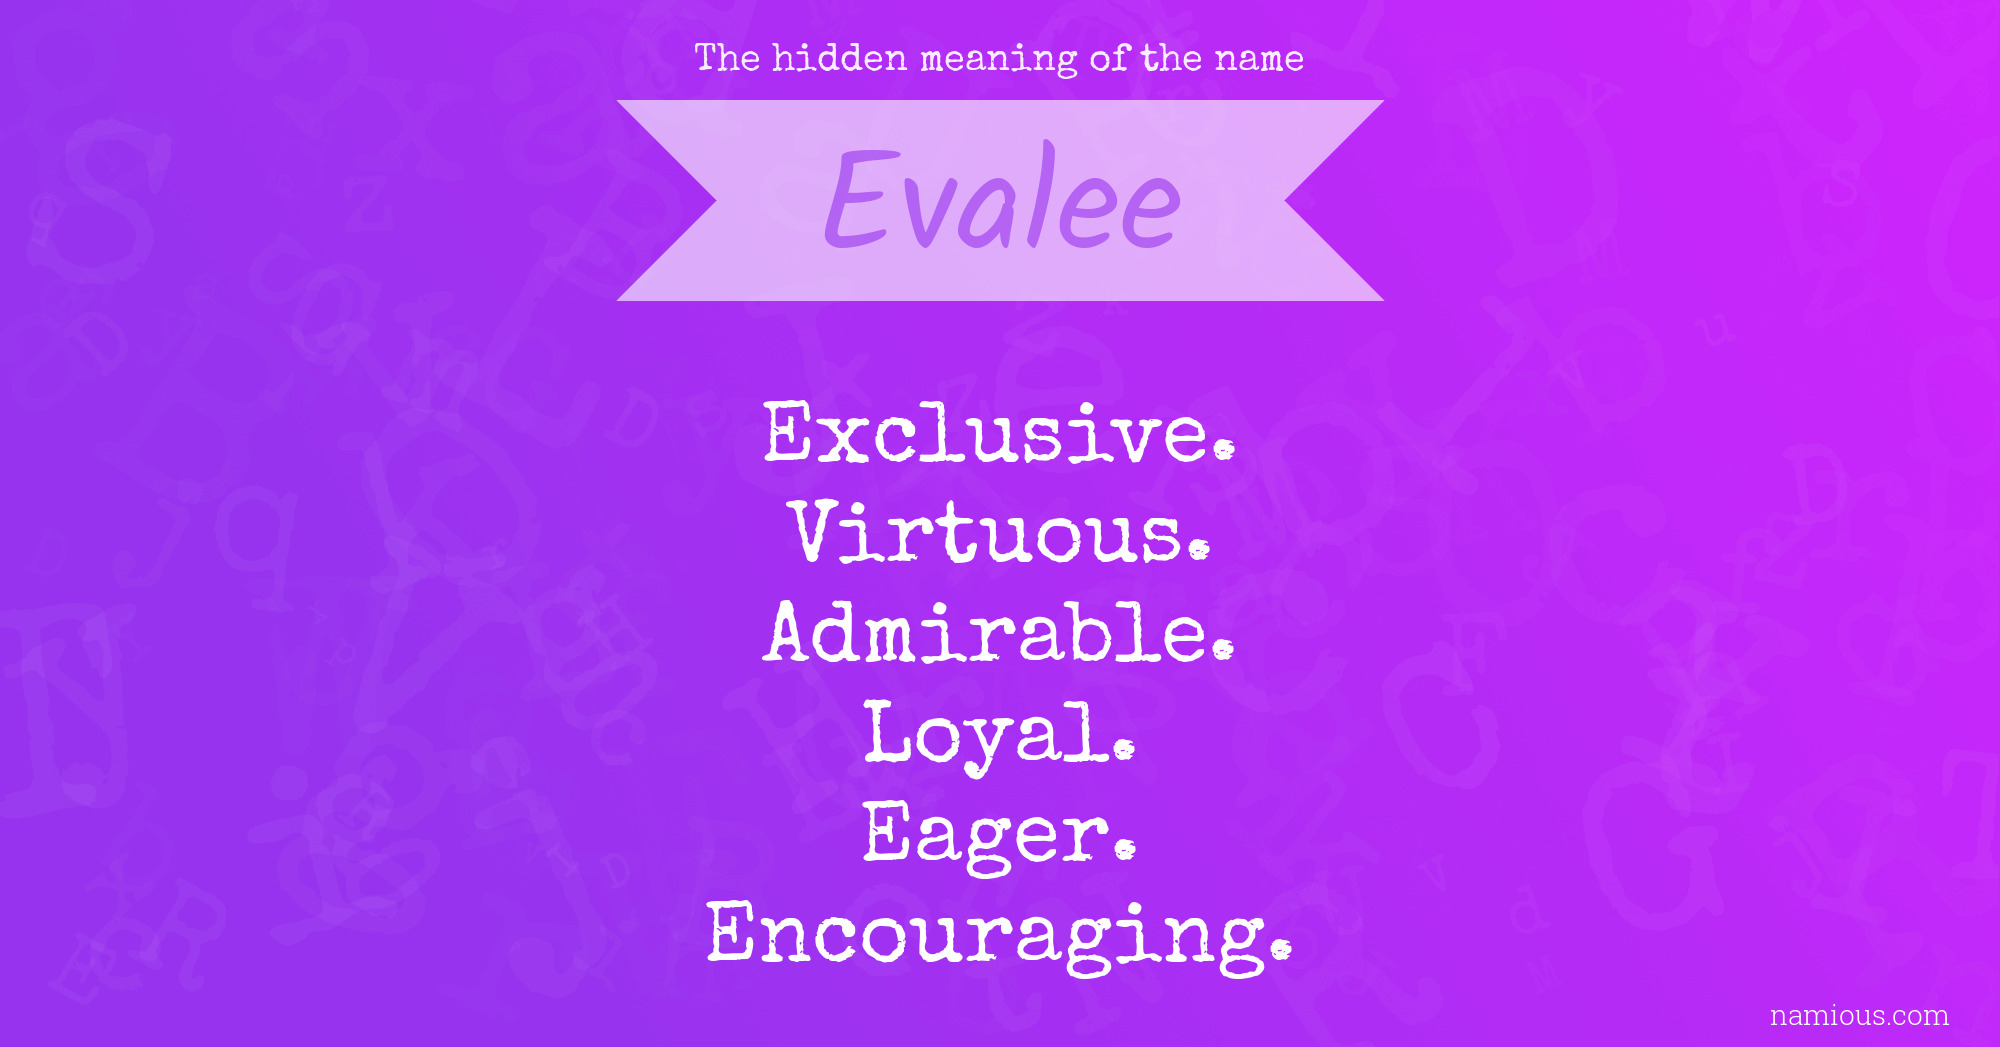 The hidden meaning of the name Evalee